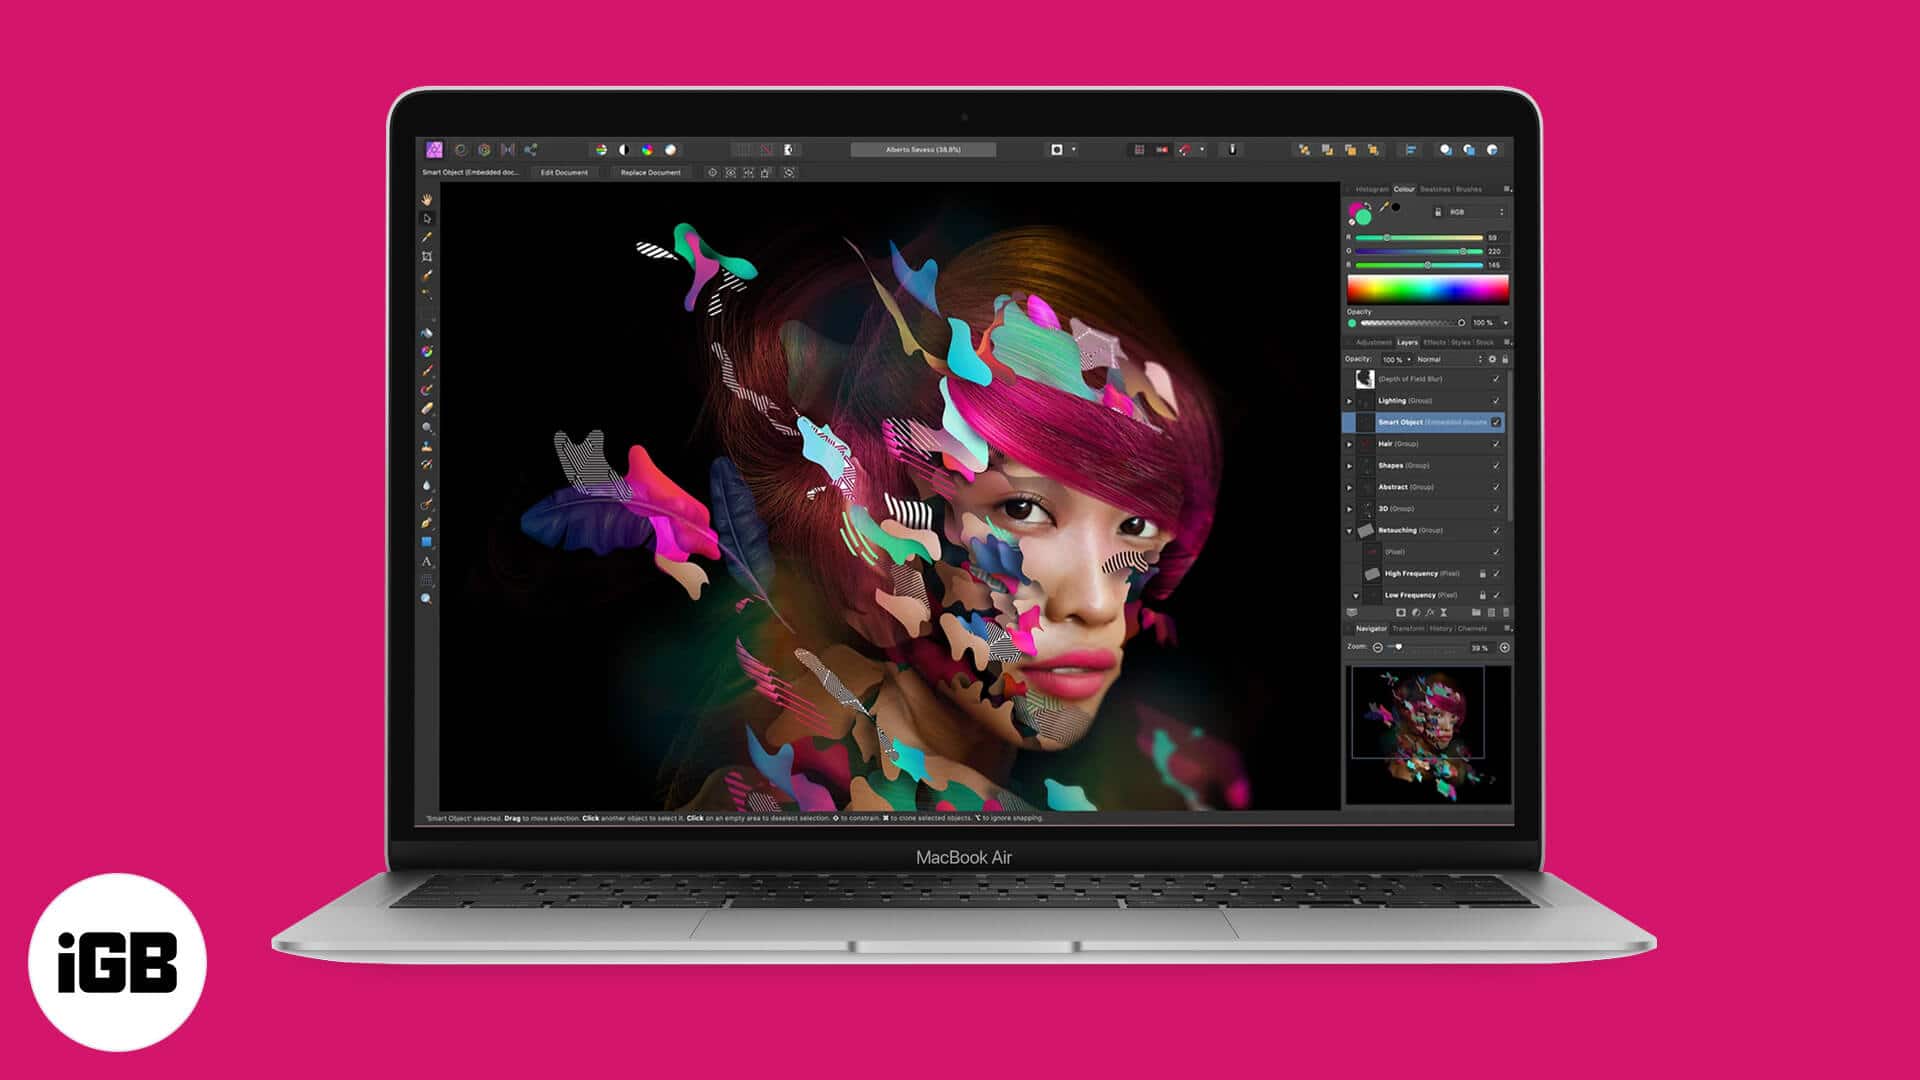 best free mac app for photo editing